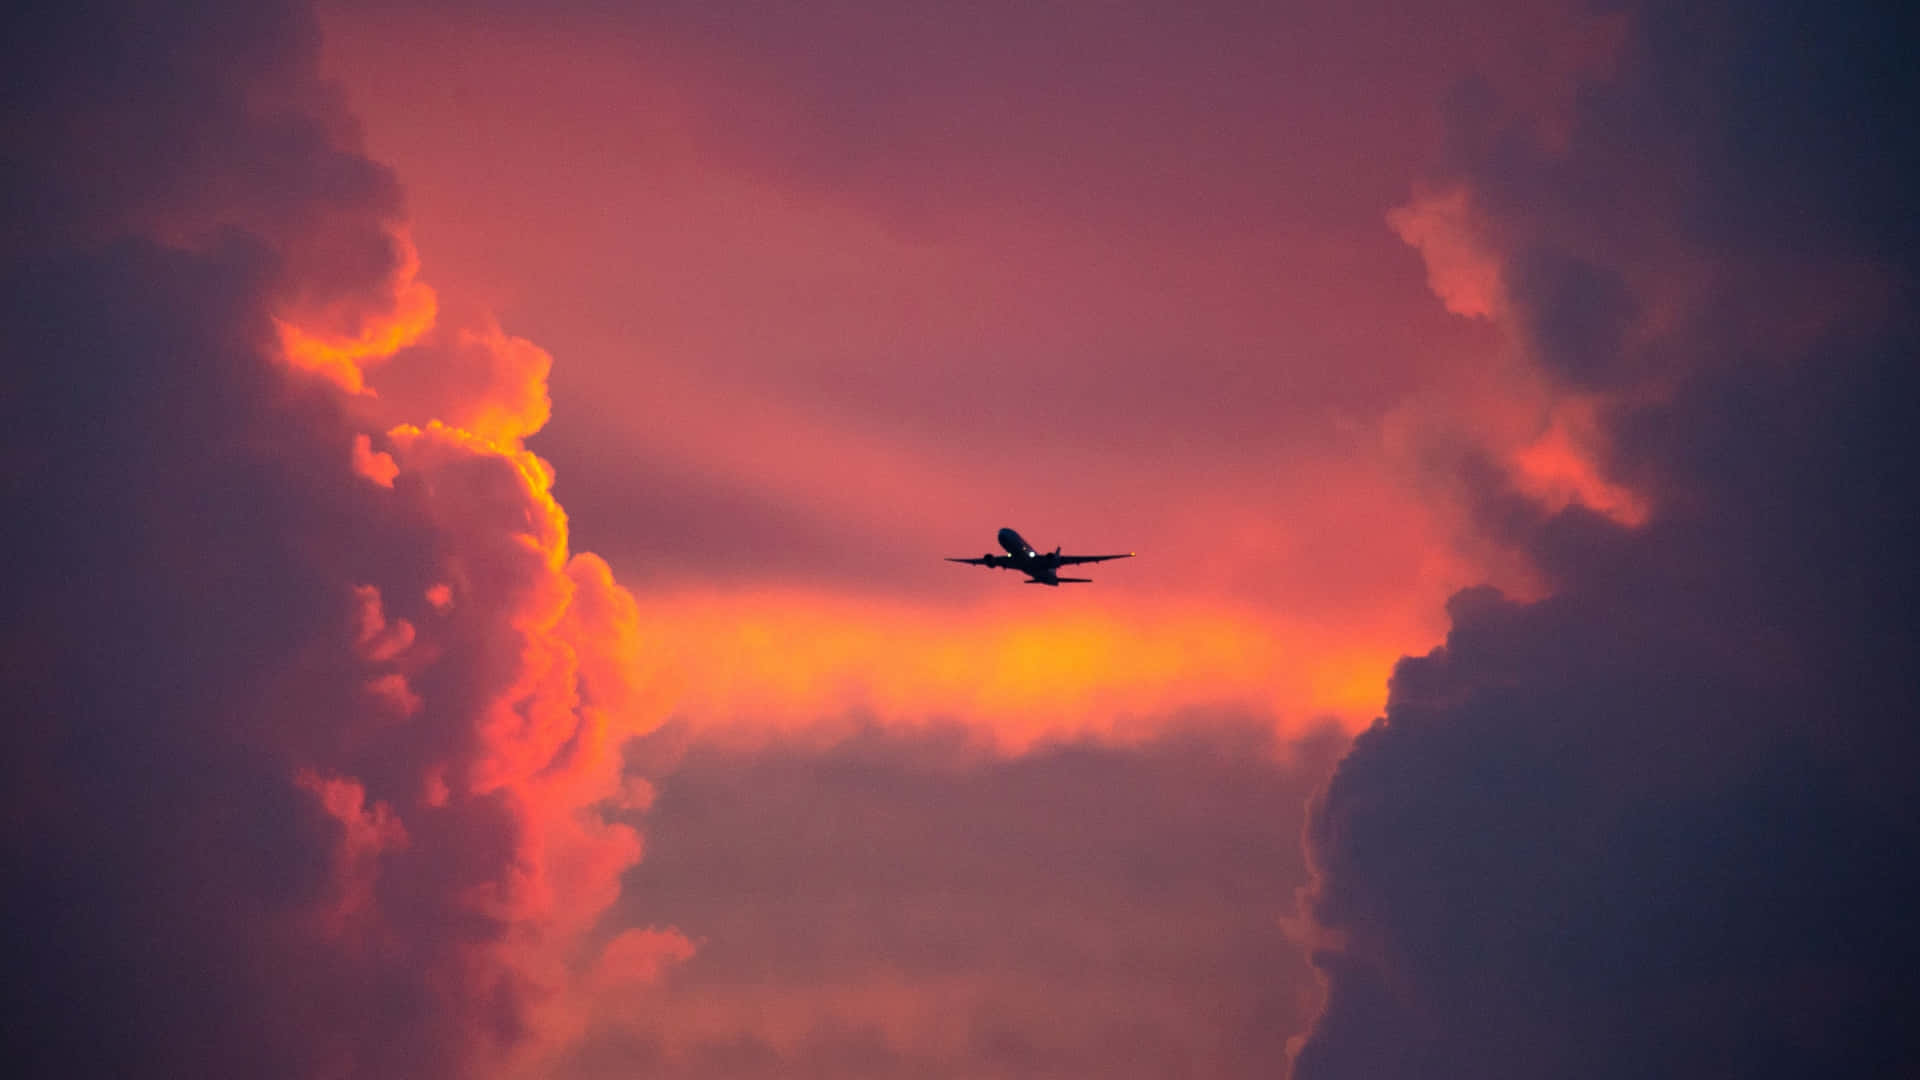 Gliding in the sky with a sleek and vibrant pink plane Wallpaper